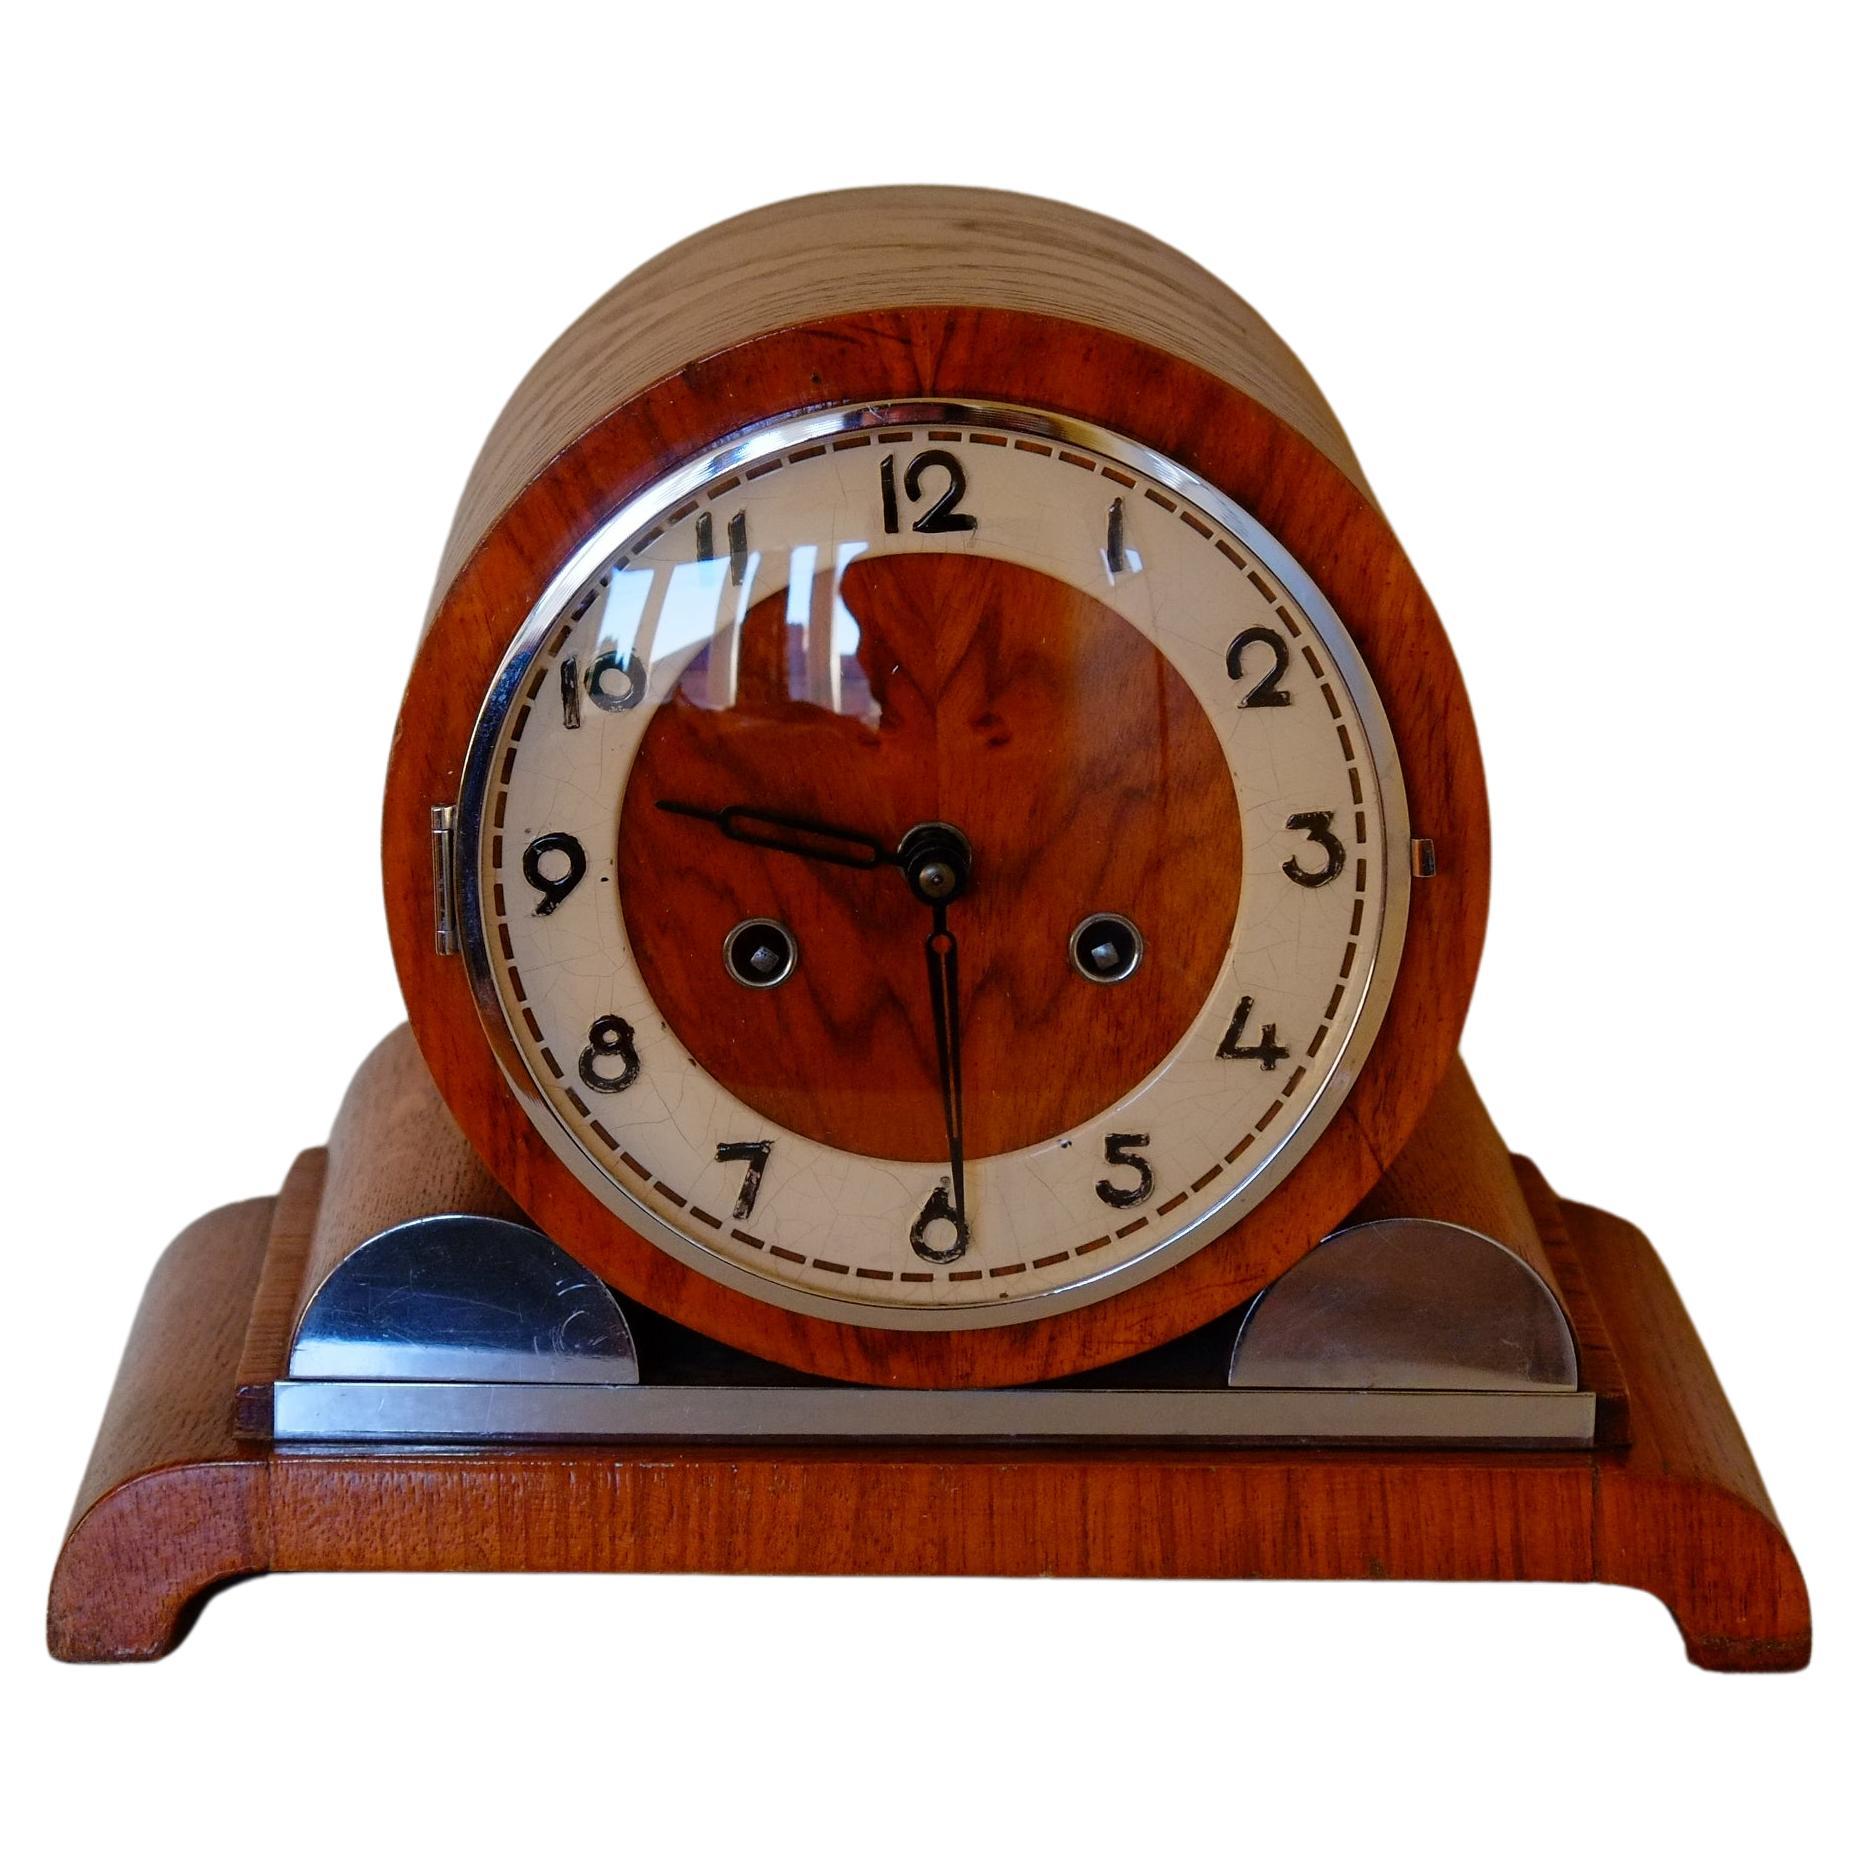 Stunning large Bauhaus mantle clock by Franz Hermle German clock makers. This clock has a stunning large barrel shape over circular shaped feet, made in oak with a walnut clock face. The numbers are a stunning Bauhaus typeface made in enamel on